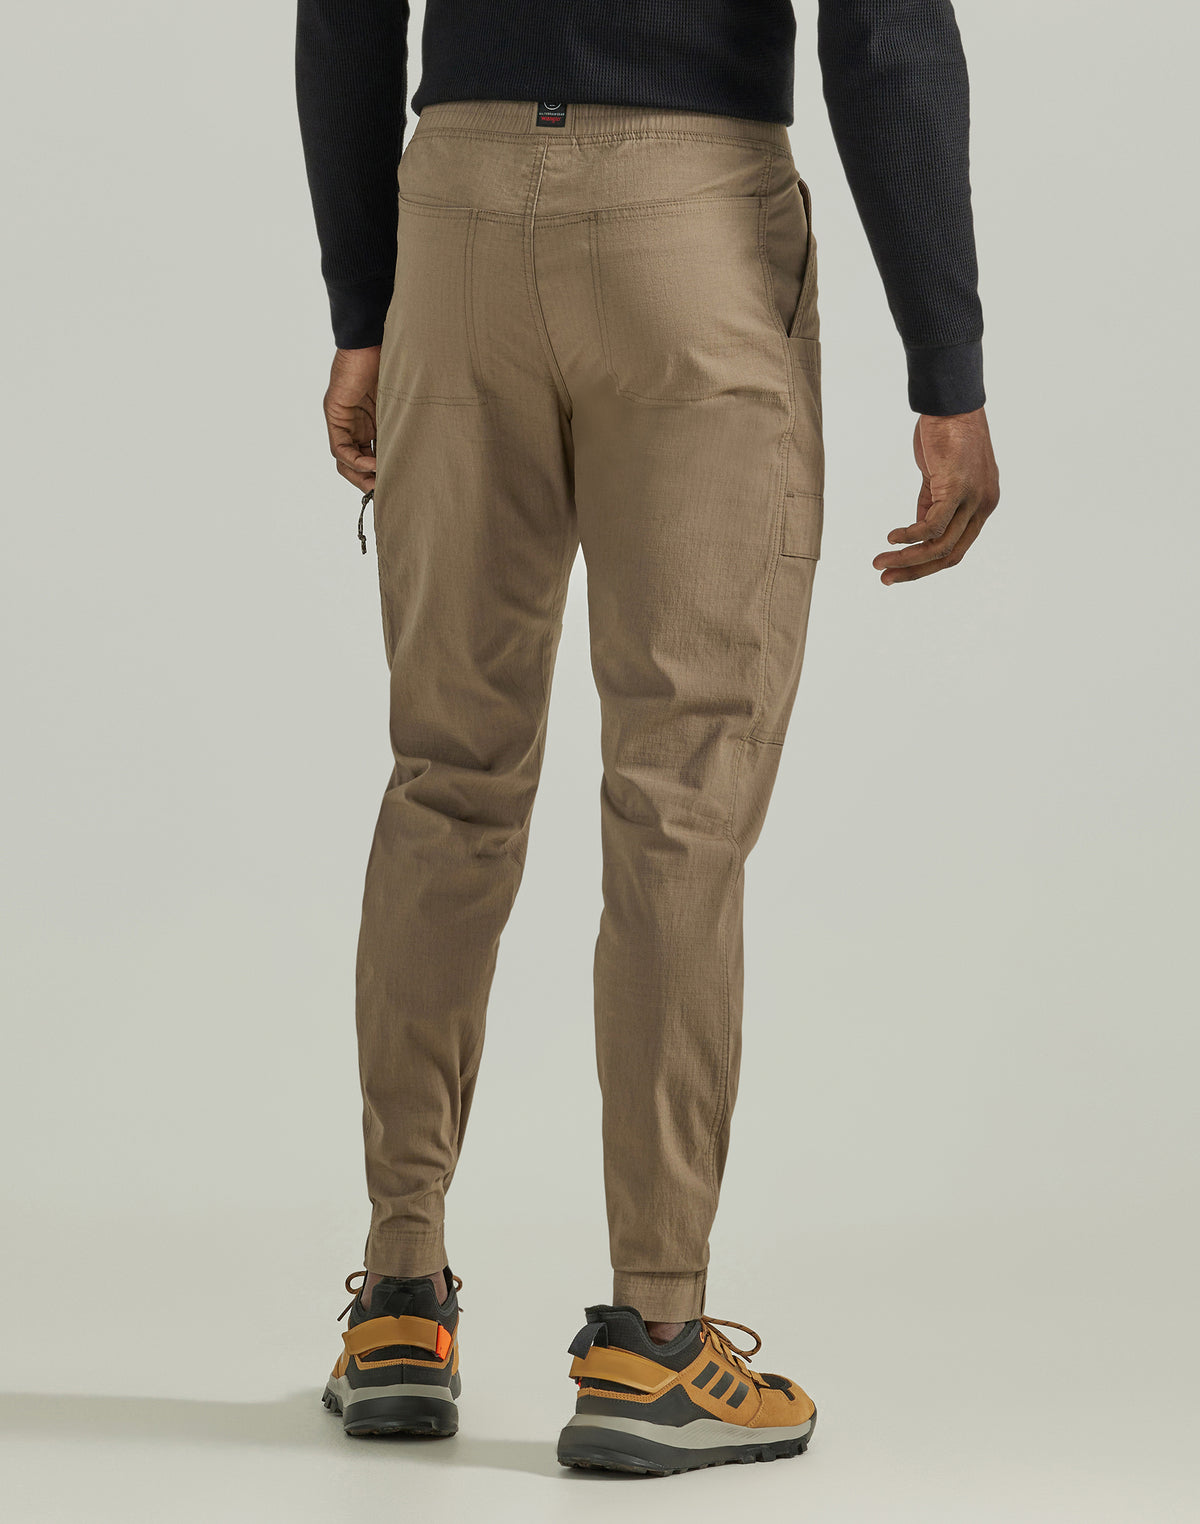 Pull On Tapered Pant in Bungee Cord